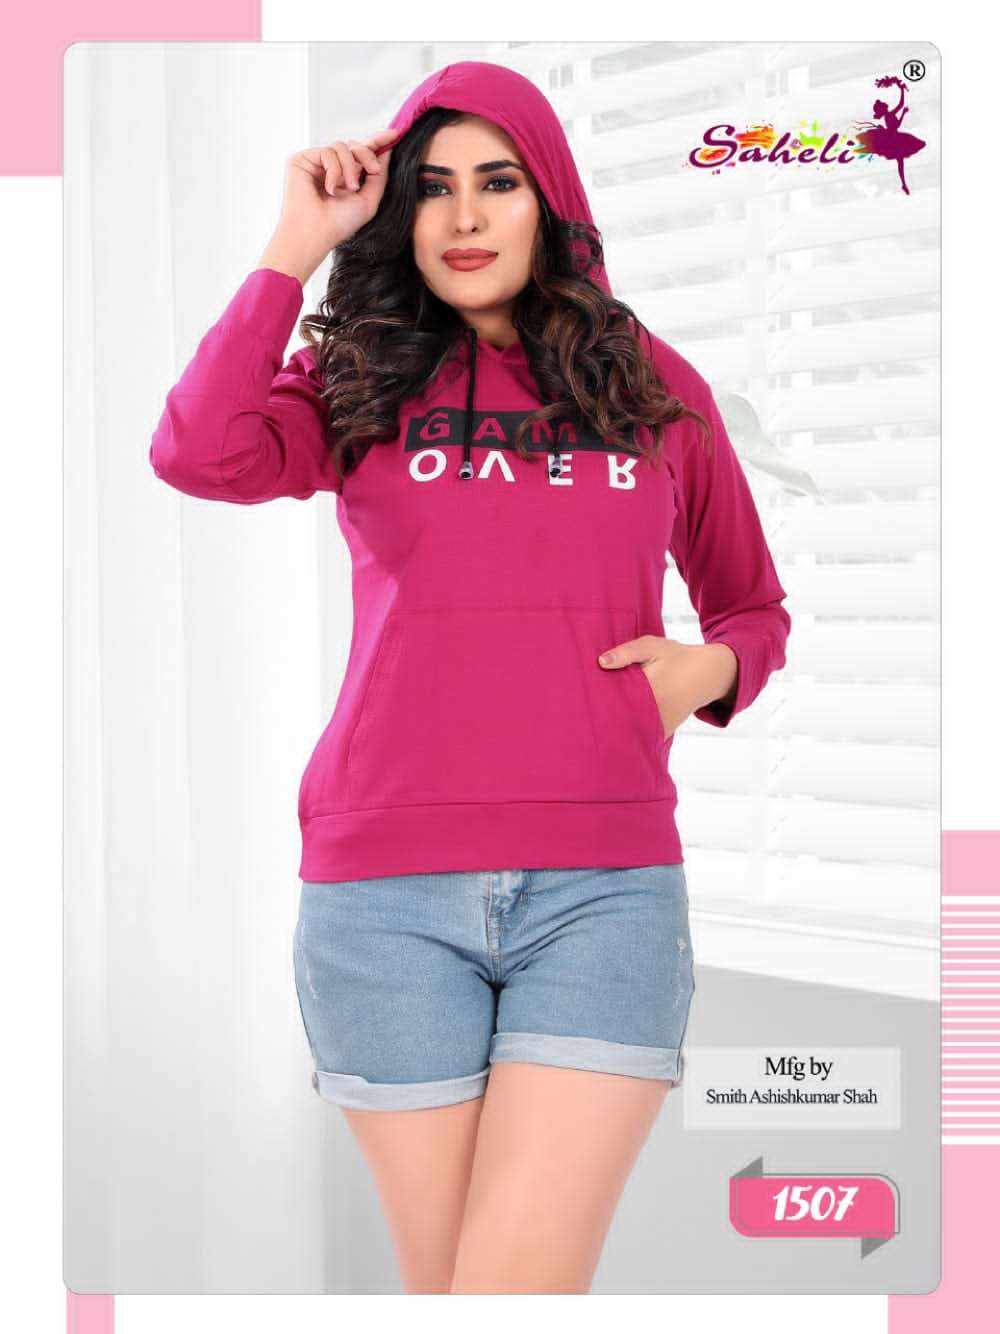 saheli launch 1507 colours hosiery hoodie winter collection wholesale at pratham fashion